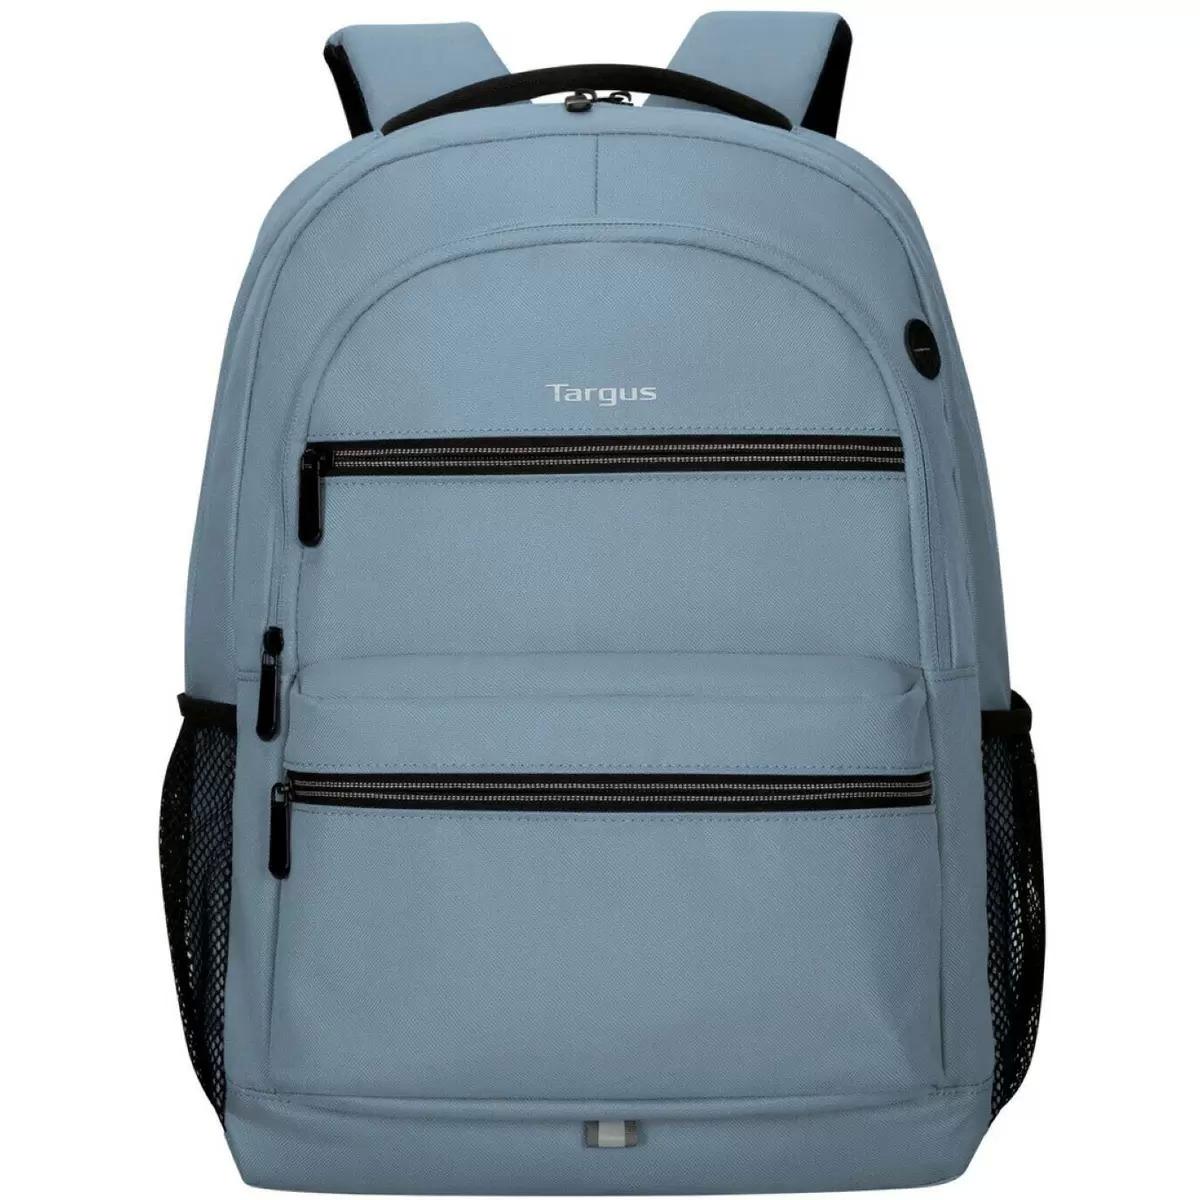 Targus Octave 15.6in Laptop Backpack for $11.99